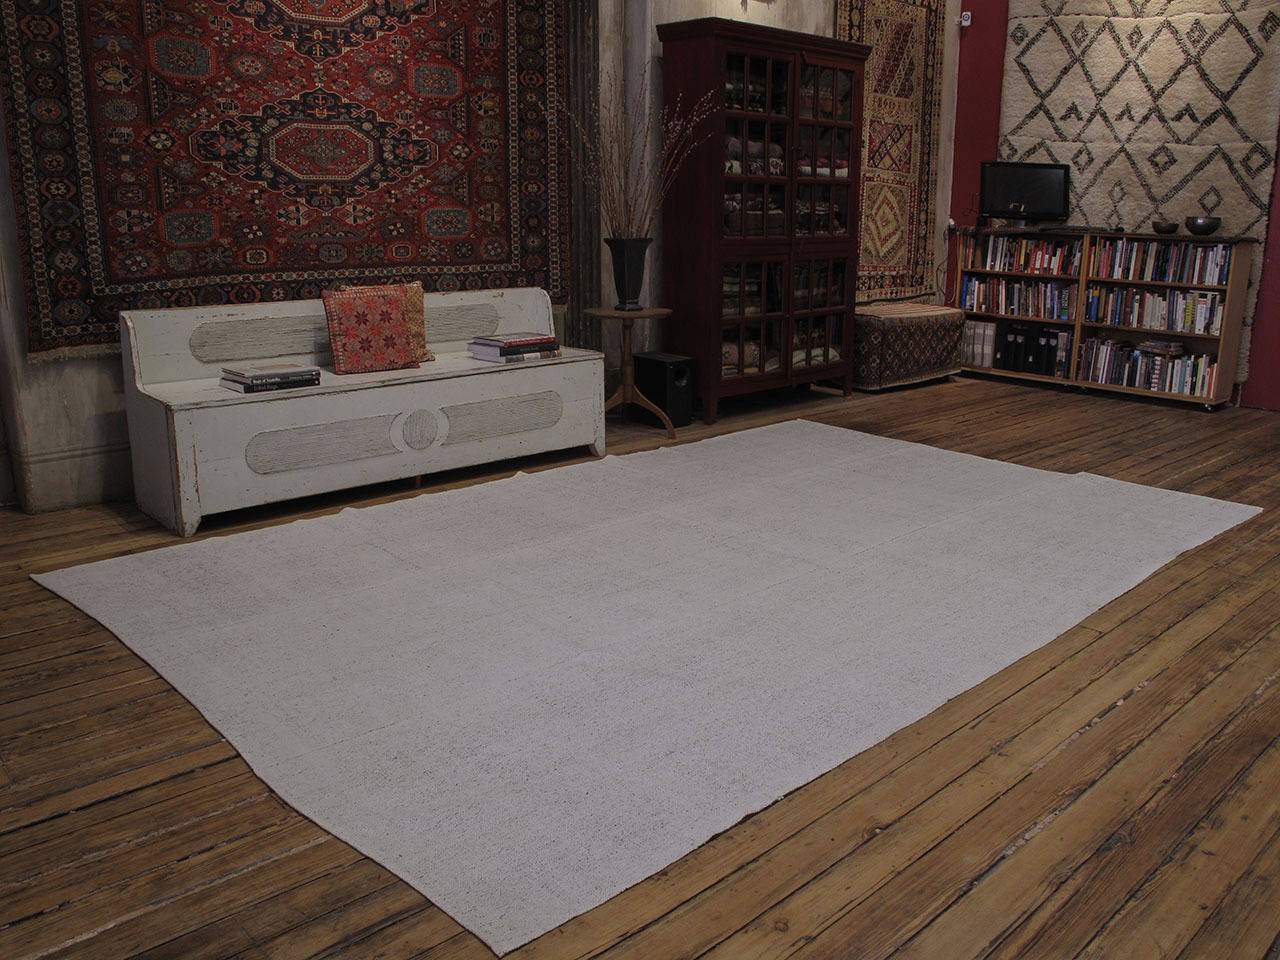 A large tribal floor cover from Southeastern Turkey, woven with a mixture of goat hair and cotton yarn. Such Kilims were often used in the fields during harvest time. An old weaving with modern, timeless appeal.